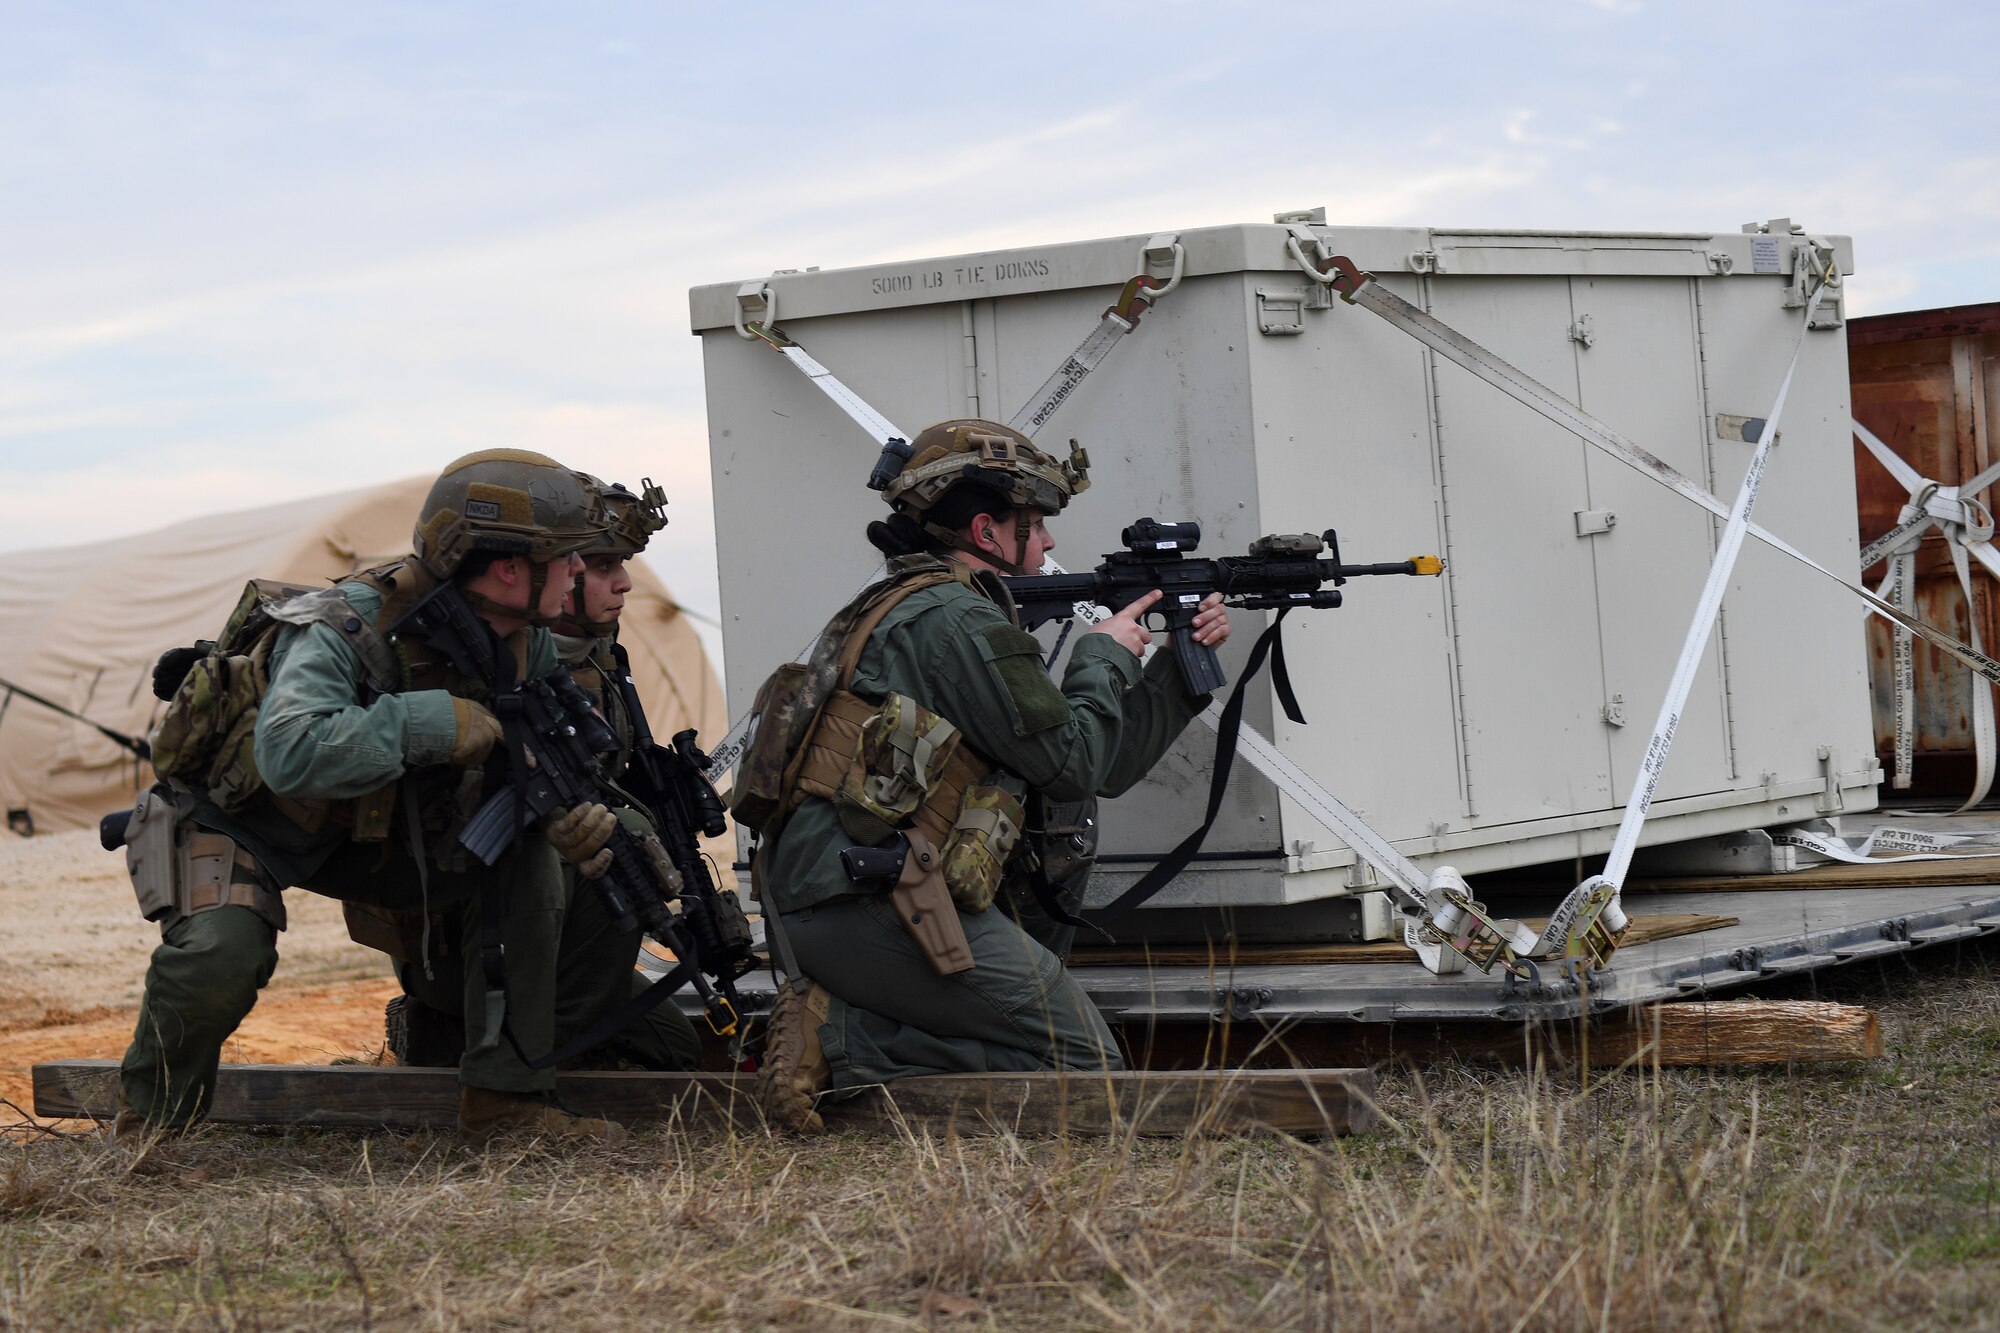 Contingency Response Forces assigned to the 821st Contingency Response Group out of Travis Air Force Base, Calif., respond to a simulated gunfire attack at the Geronimo Landing Zone during a mission in support of Green Flag Little Rock exercise, Feb. 11, 2019, Fort Polk, La. The primary objective of the exercise is to support the Joint Readiness Training Center and provide the maximum number of airlift crews, mission planners and ground support elements to a simulated combat environment with emphasis on joint force integration. (U.S. Air Force photo by Tech. Sgt. Liliana Moreno)